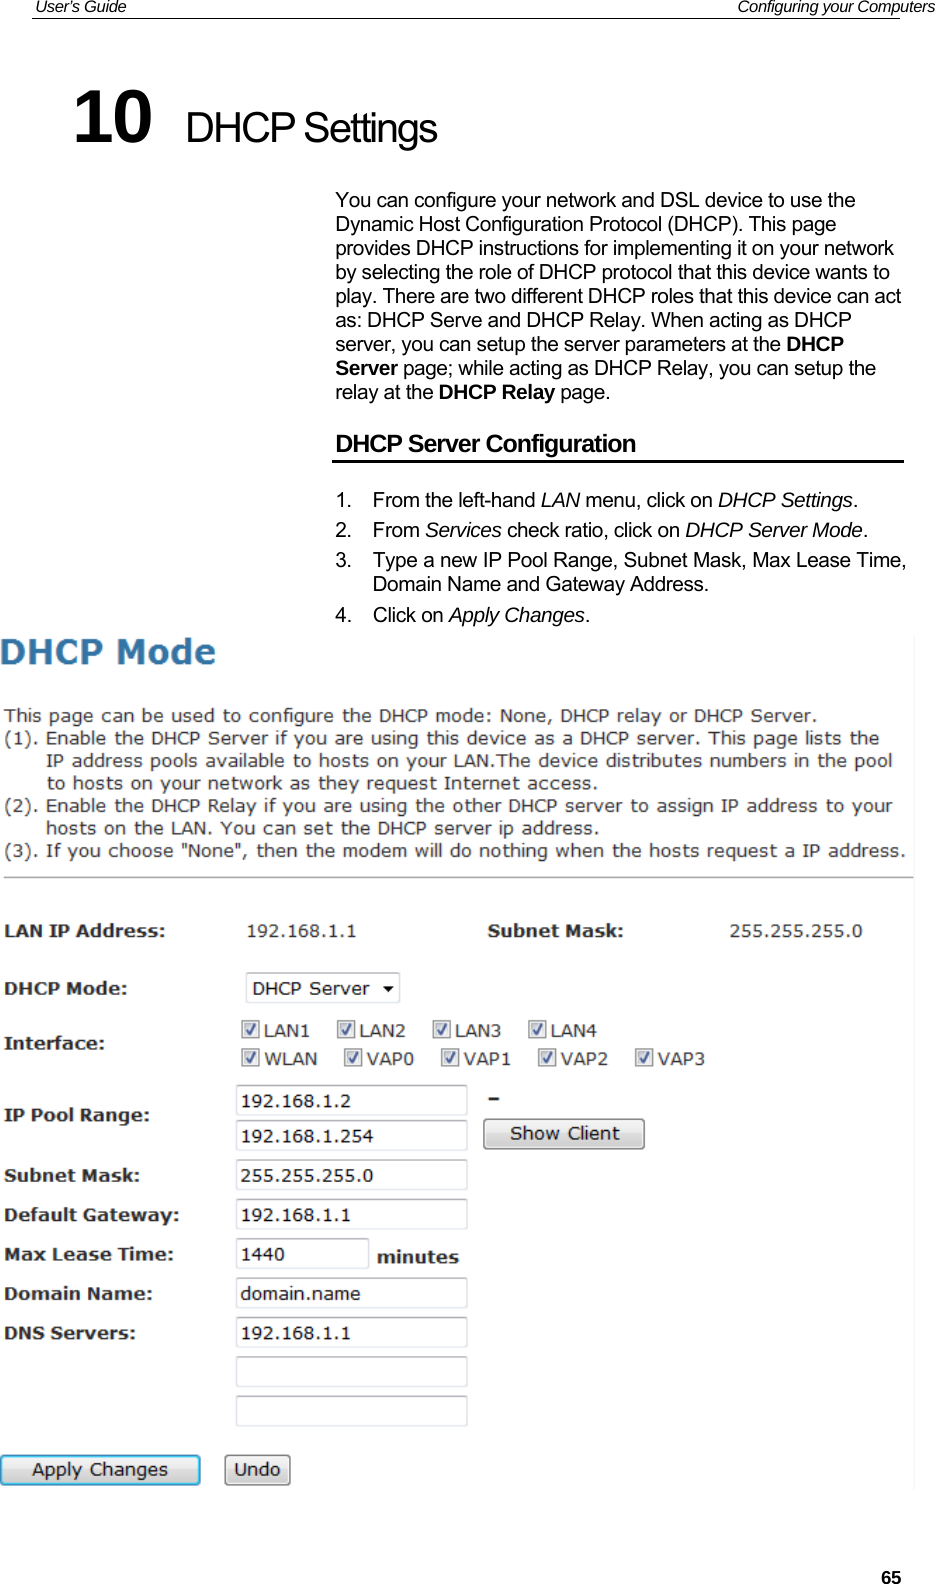 User’s Guide   Configuring your Computers 10  DHCP Settings You can configure your network and DSL device to use the Dynamic Host Configuration Protocol (DHCP). This page provides DHCP instructions for implementing it on your network by selecting the role of DHCP protocol that this device wants to play. There are two different DHCP roles that this device can act as: DHCP Serve and DHCP Relay. When acting as DHCP server, you can setup the server parameters at the DHCP Server page; while acting as DHCP Relay, you can setup the relay at the DHCP Relay page. DHCP Server Configuration 1.  From the left-hand LAN menu, click on DHCP Settings. 2. From Services check ratio, click on DHCP Server Mode. 3.  Type a new IP Pool Range, Subnet Mask, Max Lease Time, Domain Name and Gateway Address. 4. Click on Apply Changes.    65